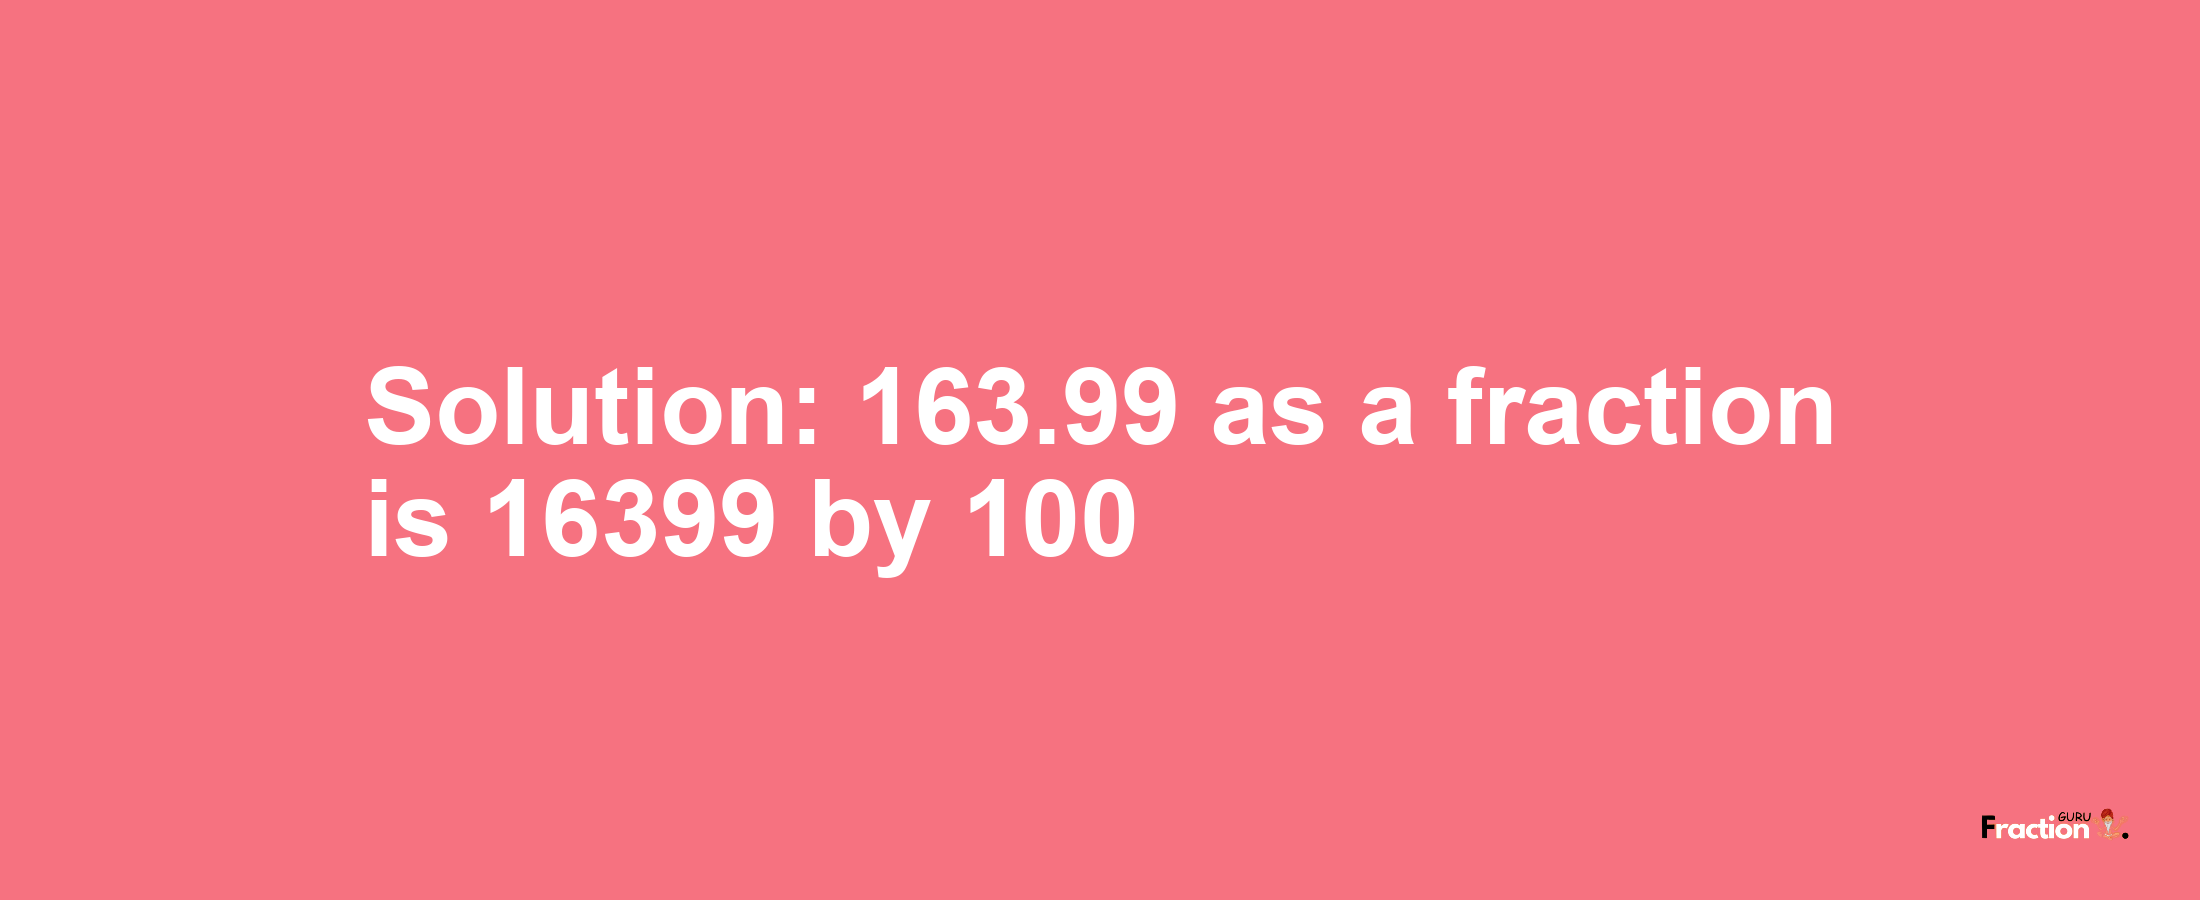 Solution:163.99 as a fraction is 16399/100